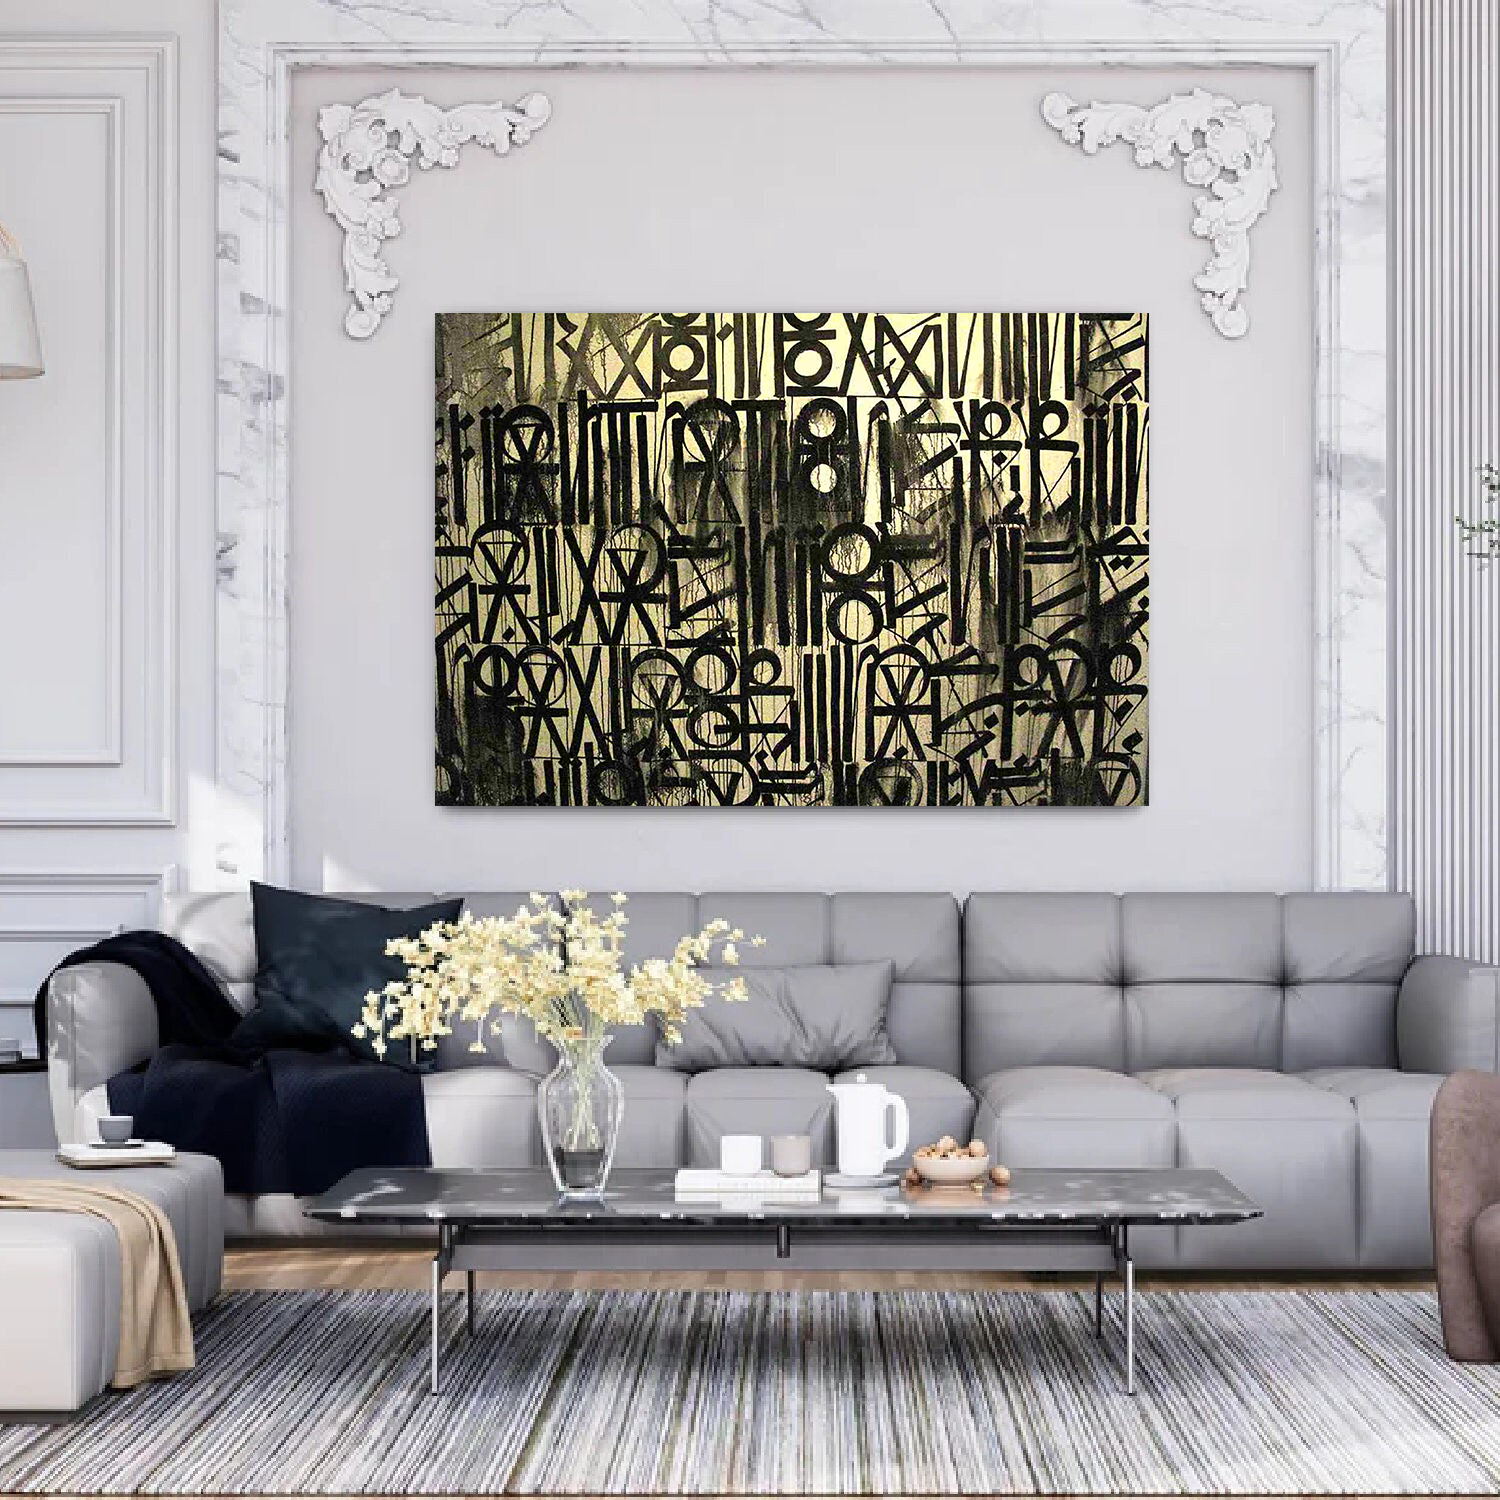 Retna-Inspired Black and Gold Calligraphic Pop Art